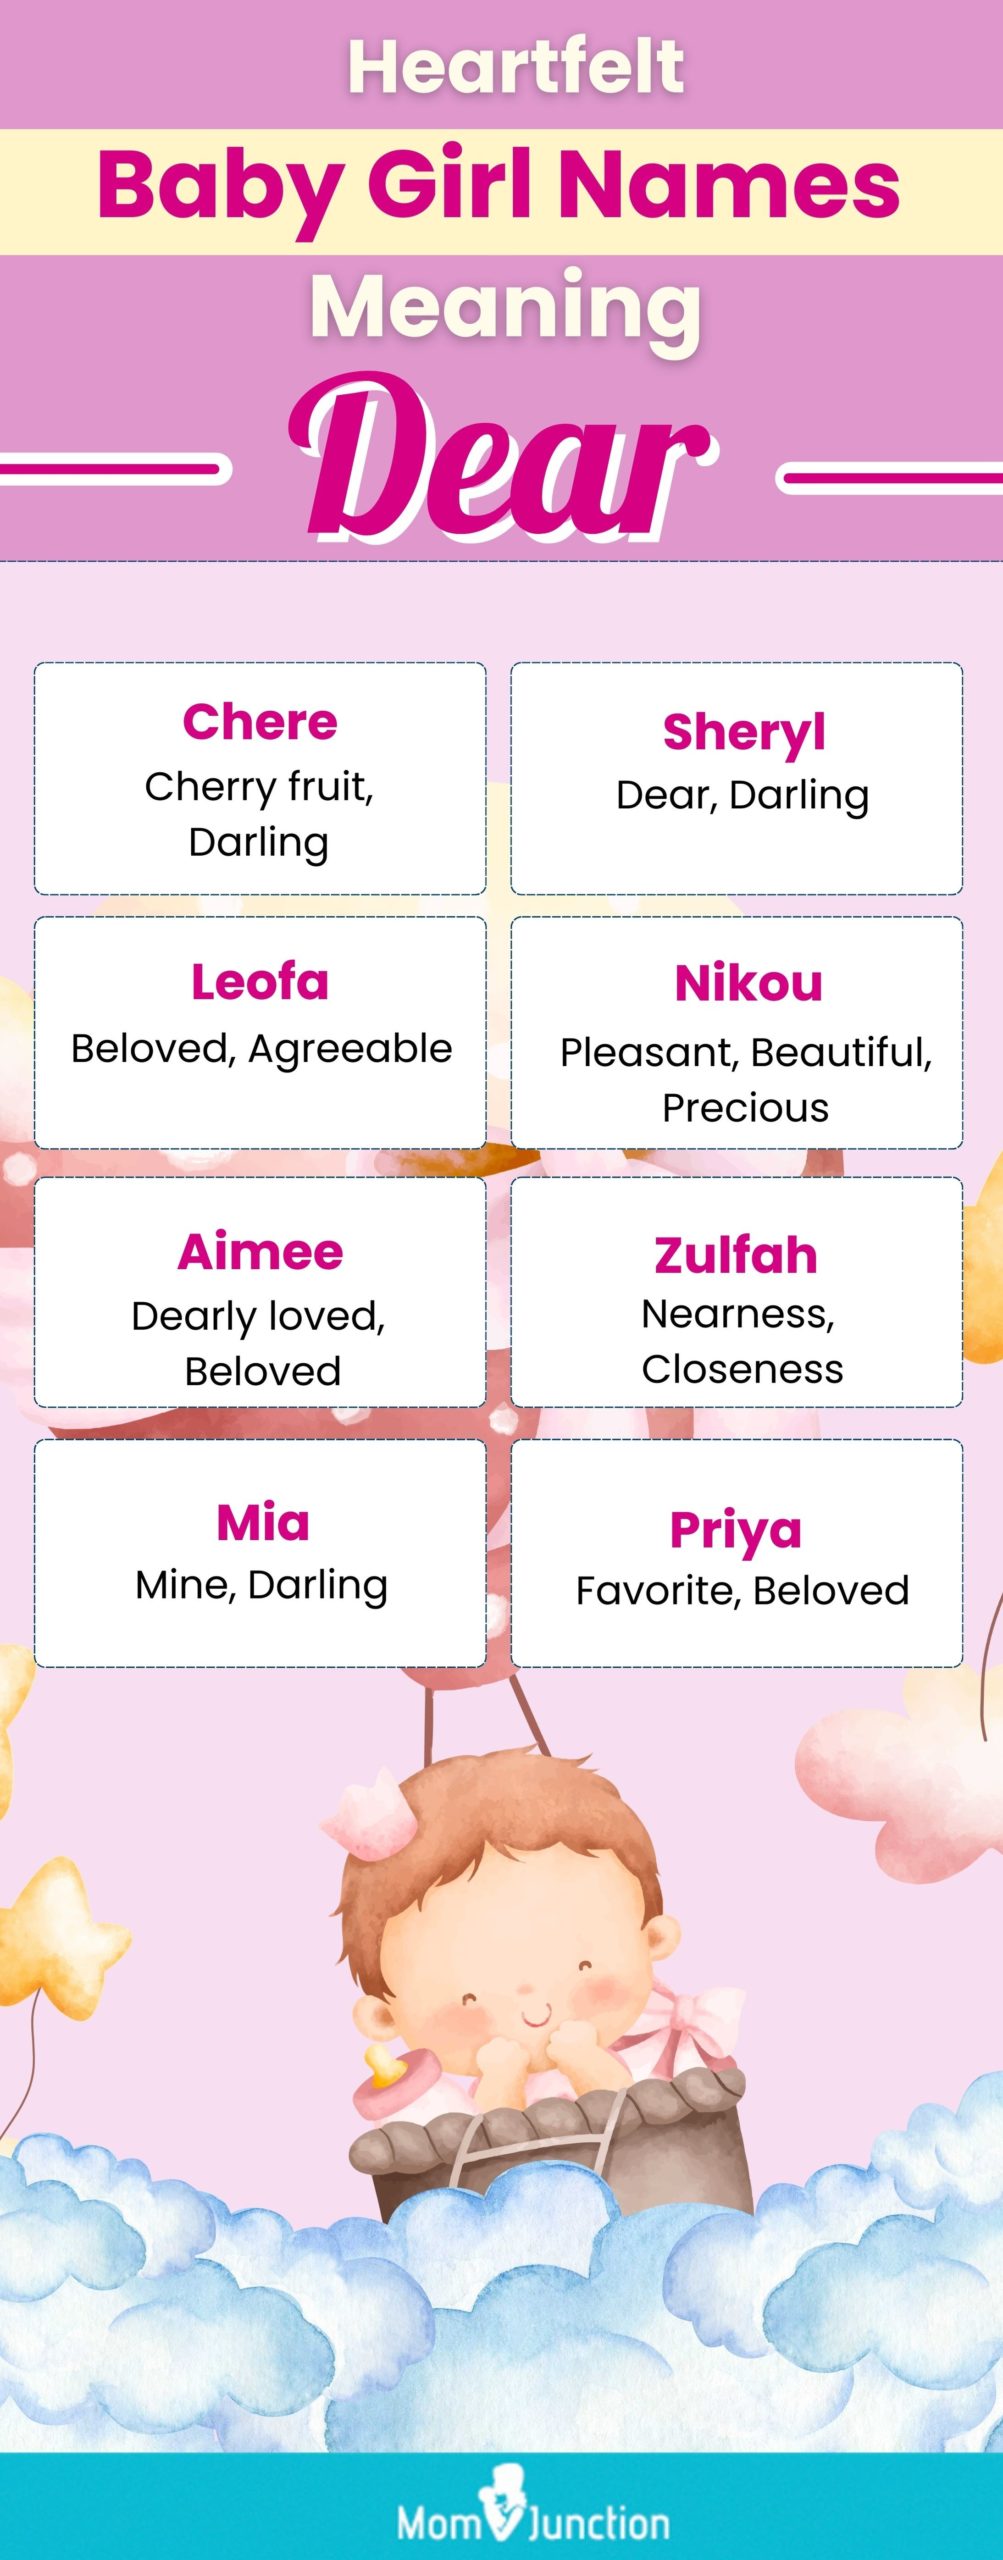 heartfelt baby girl names meaning dear (infographic)